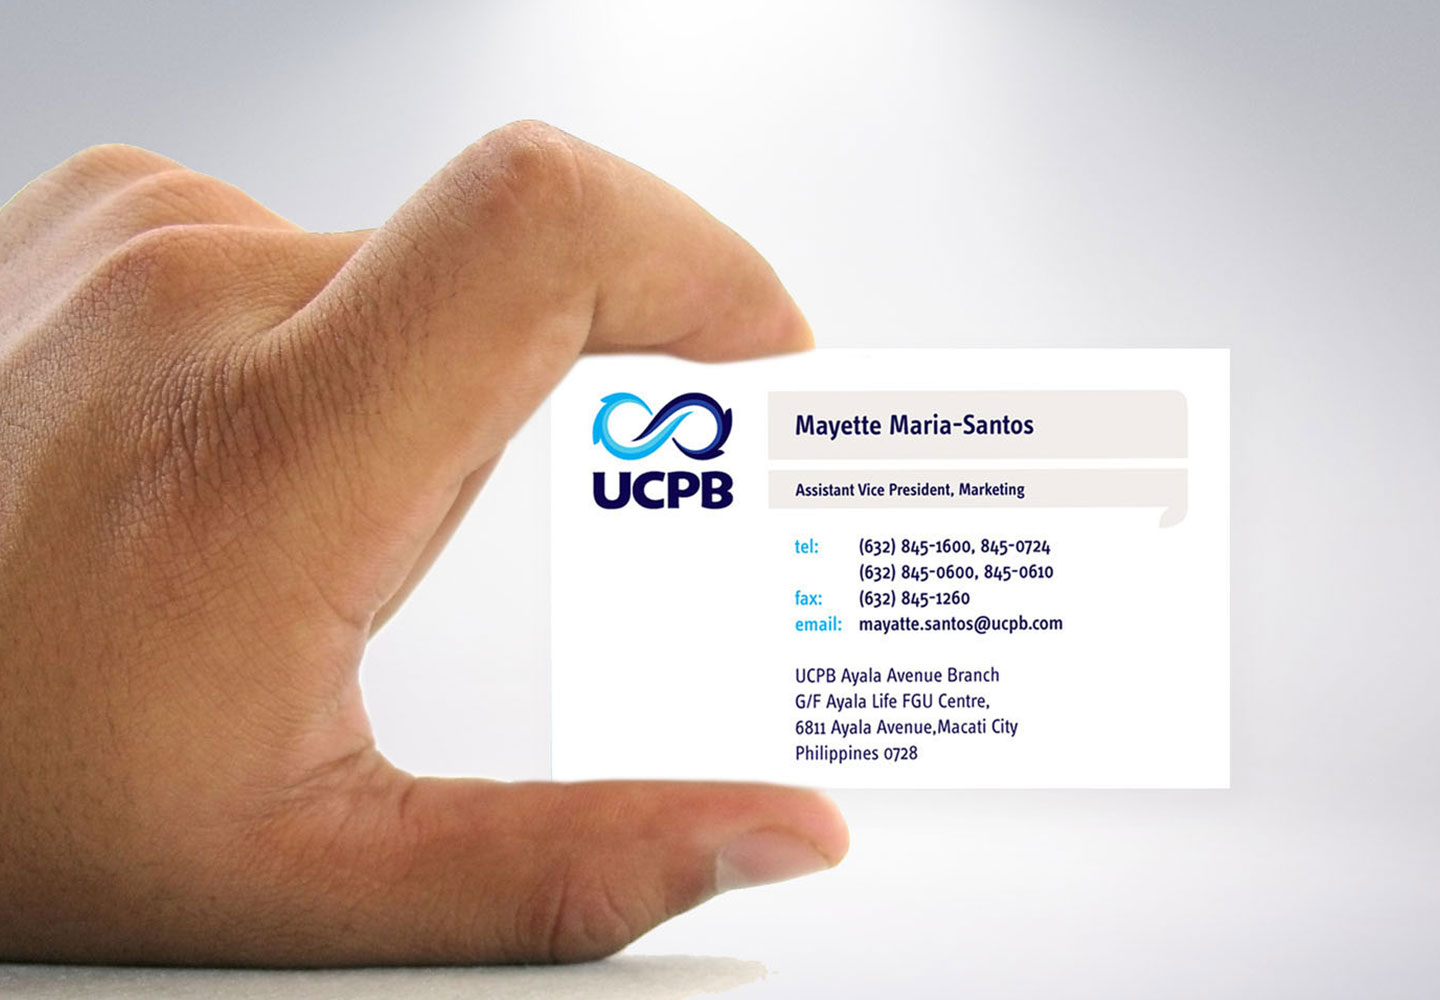 Brand Consultancy in Financial Services Industry. Business Card for UCPB.